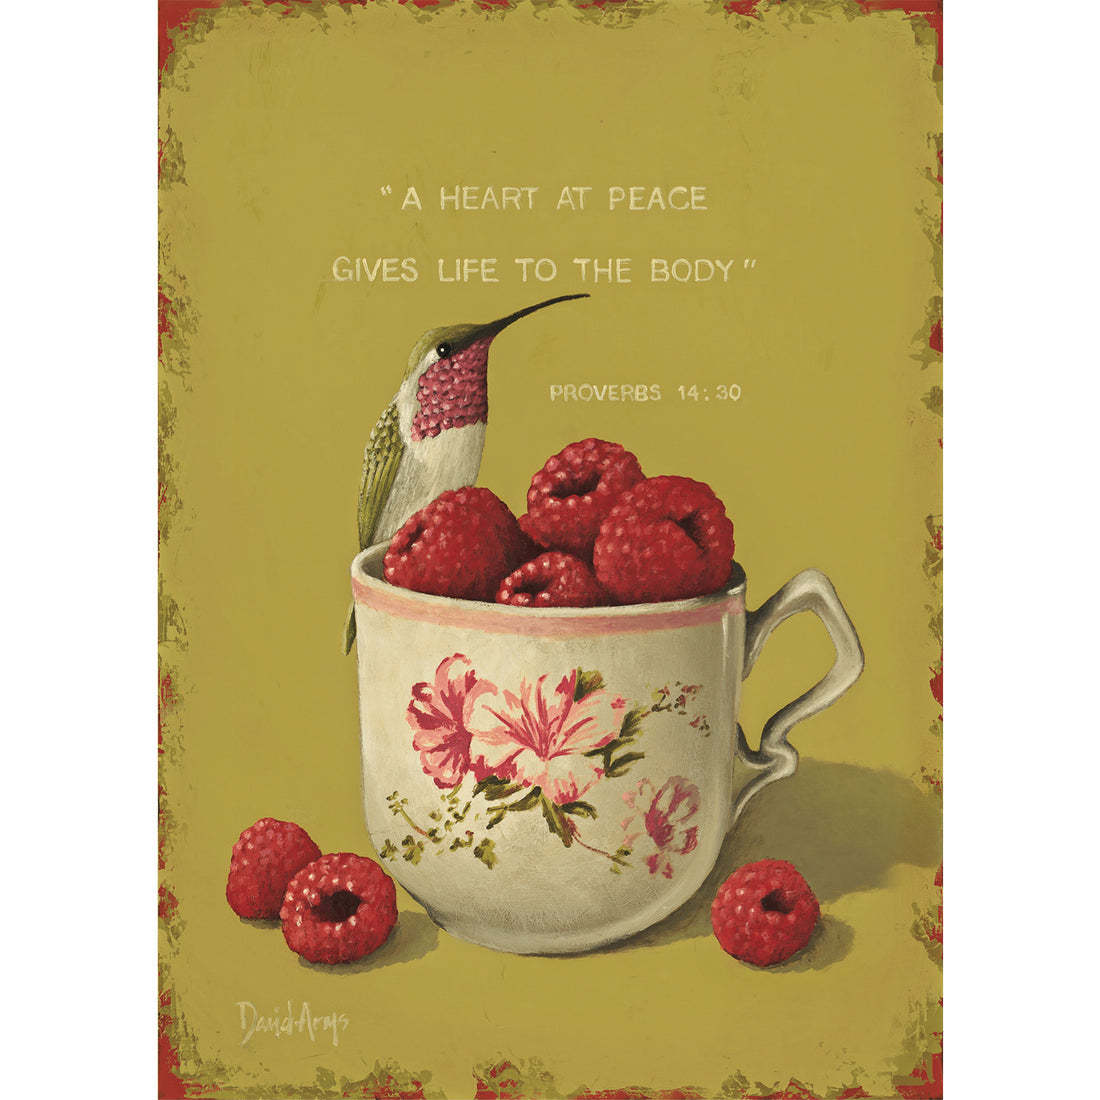 A hummingbird peacefully sits on a cup of Heart at Peace Cards by Hester &amp; Cook, bringing a sense of stillness and renewal.